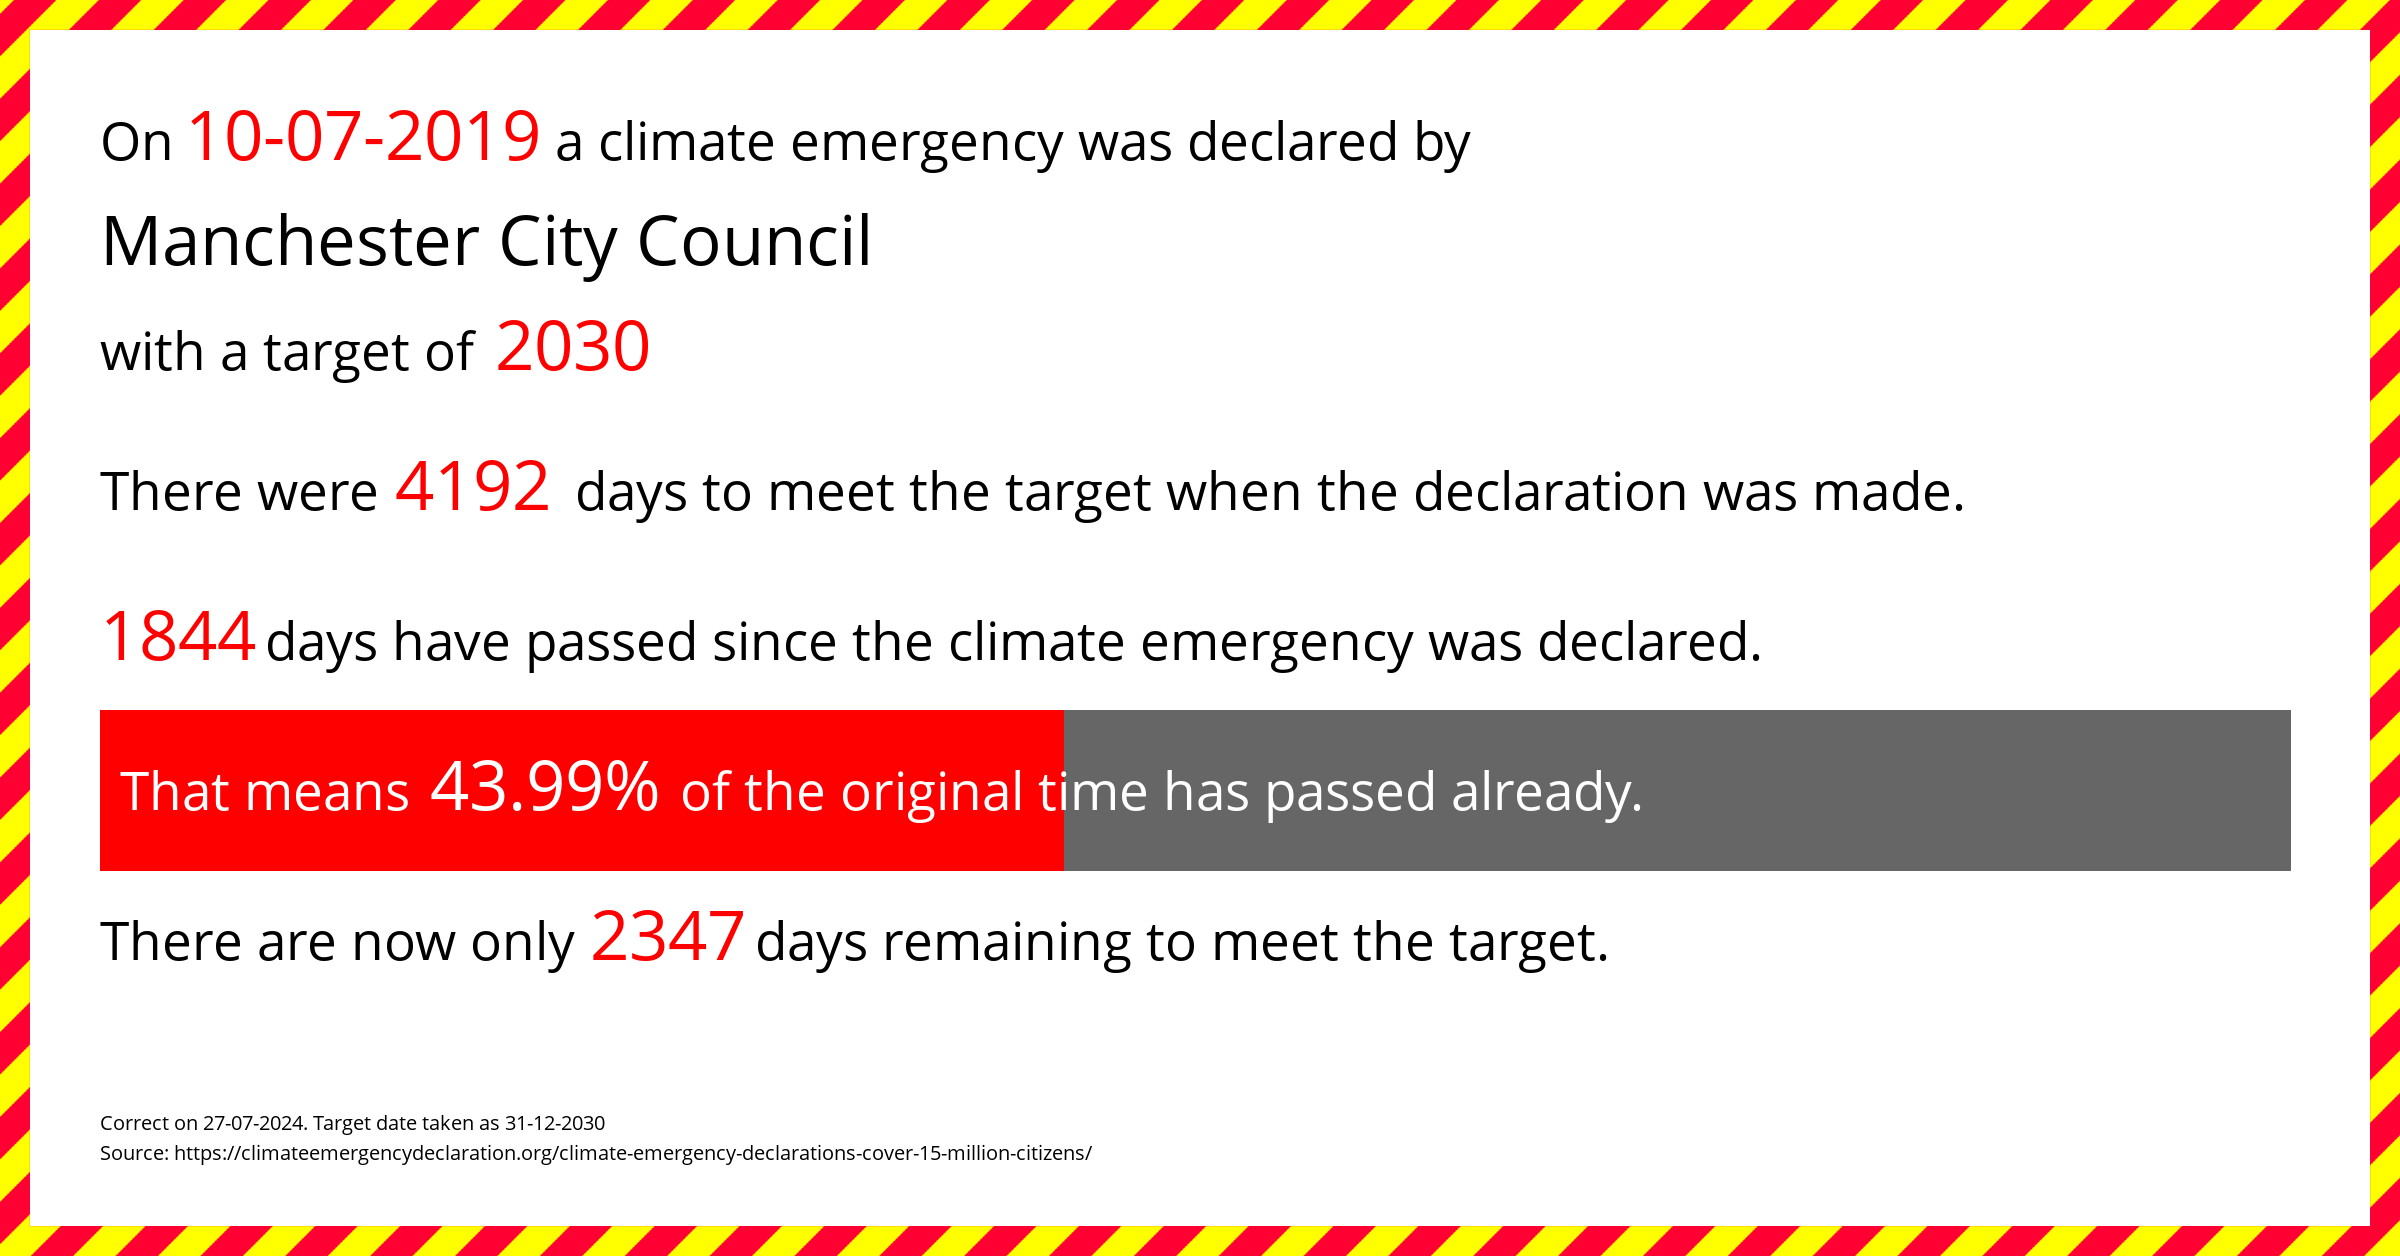 Manchester City Council declared a Climate emergency on Wednesday 10th July 2019, with a target of 2030.